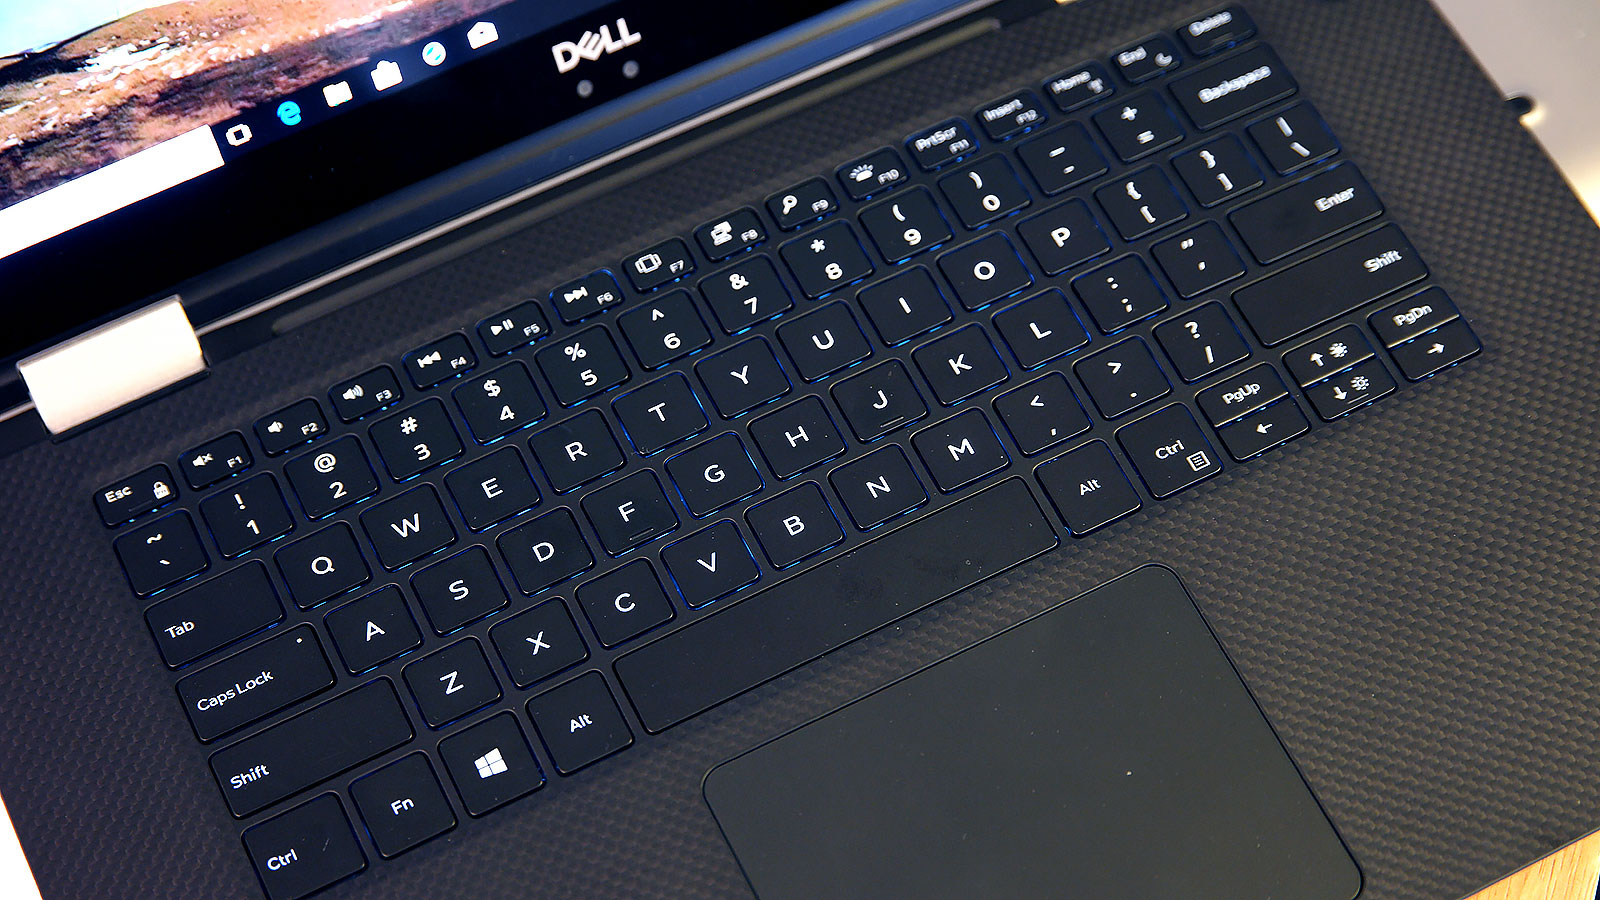 Dell’s XPS 15 2-in-1 Wants To Be The Anti-MacBook Pro